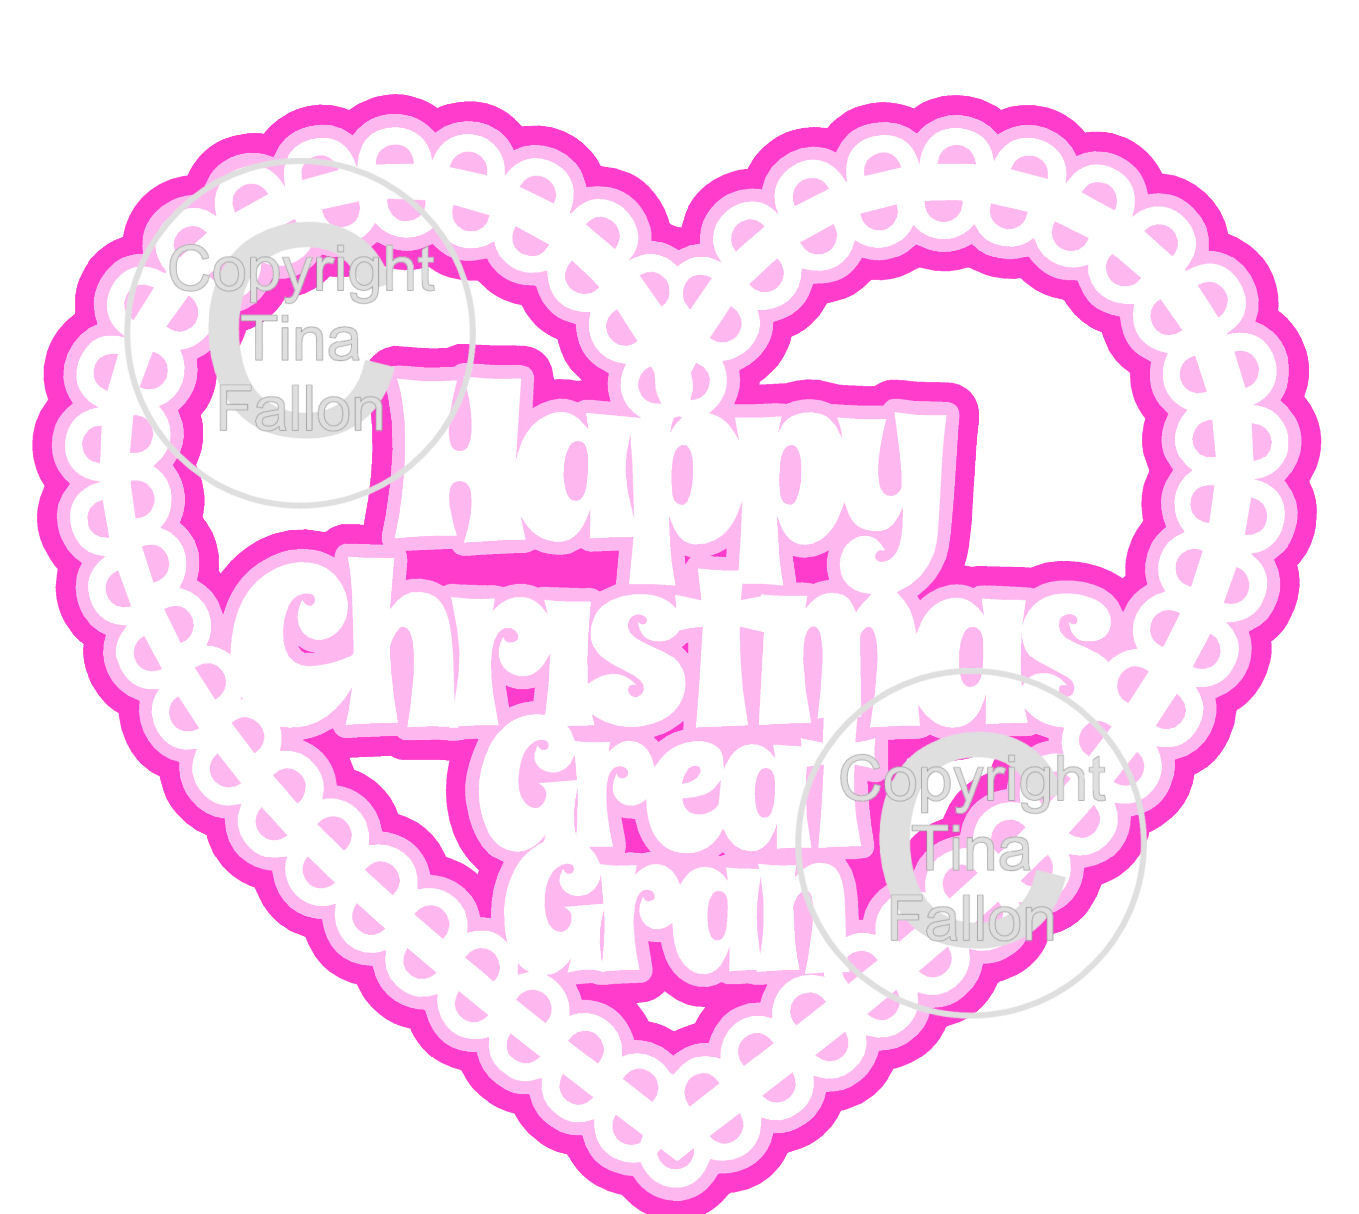 Christmas Heart Great Gran Card Topper / Hanging Ornament